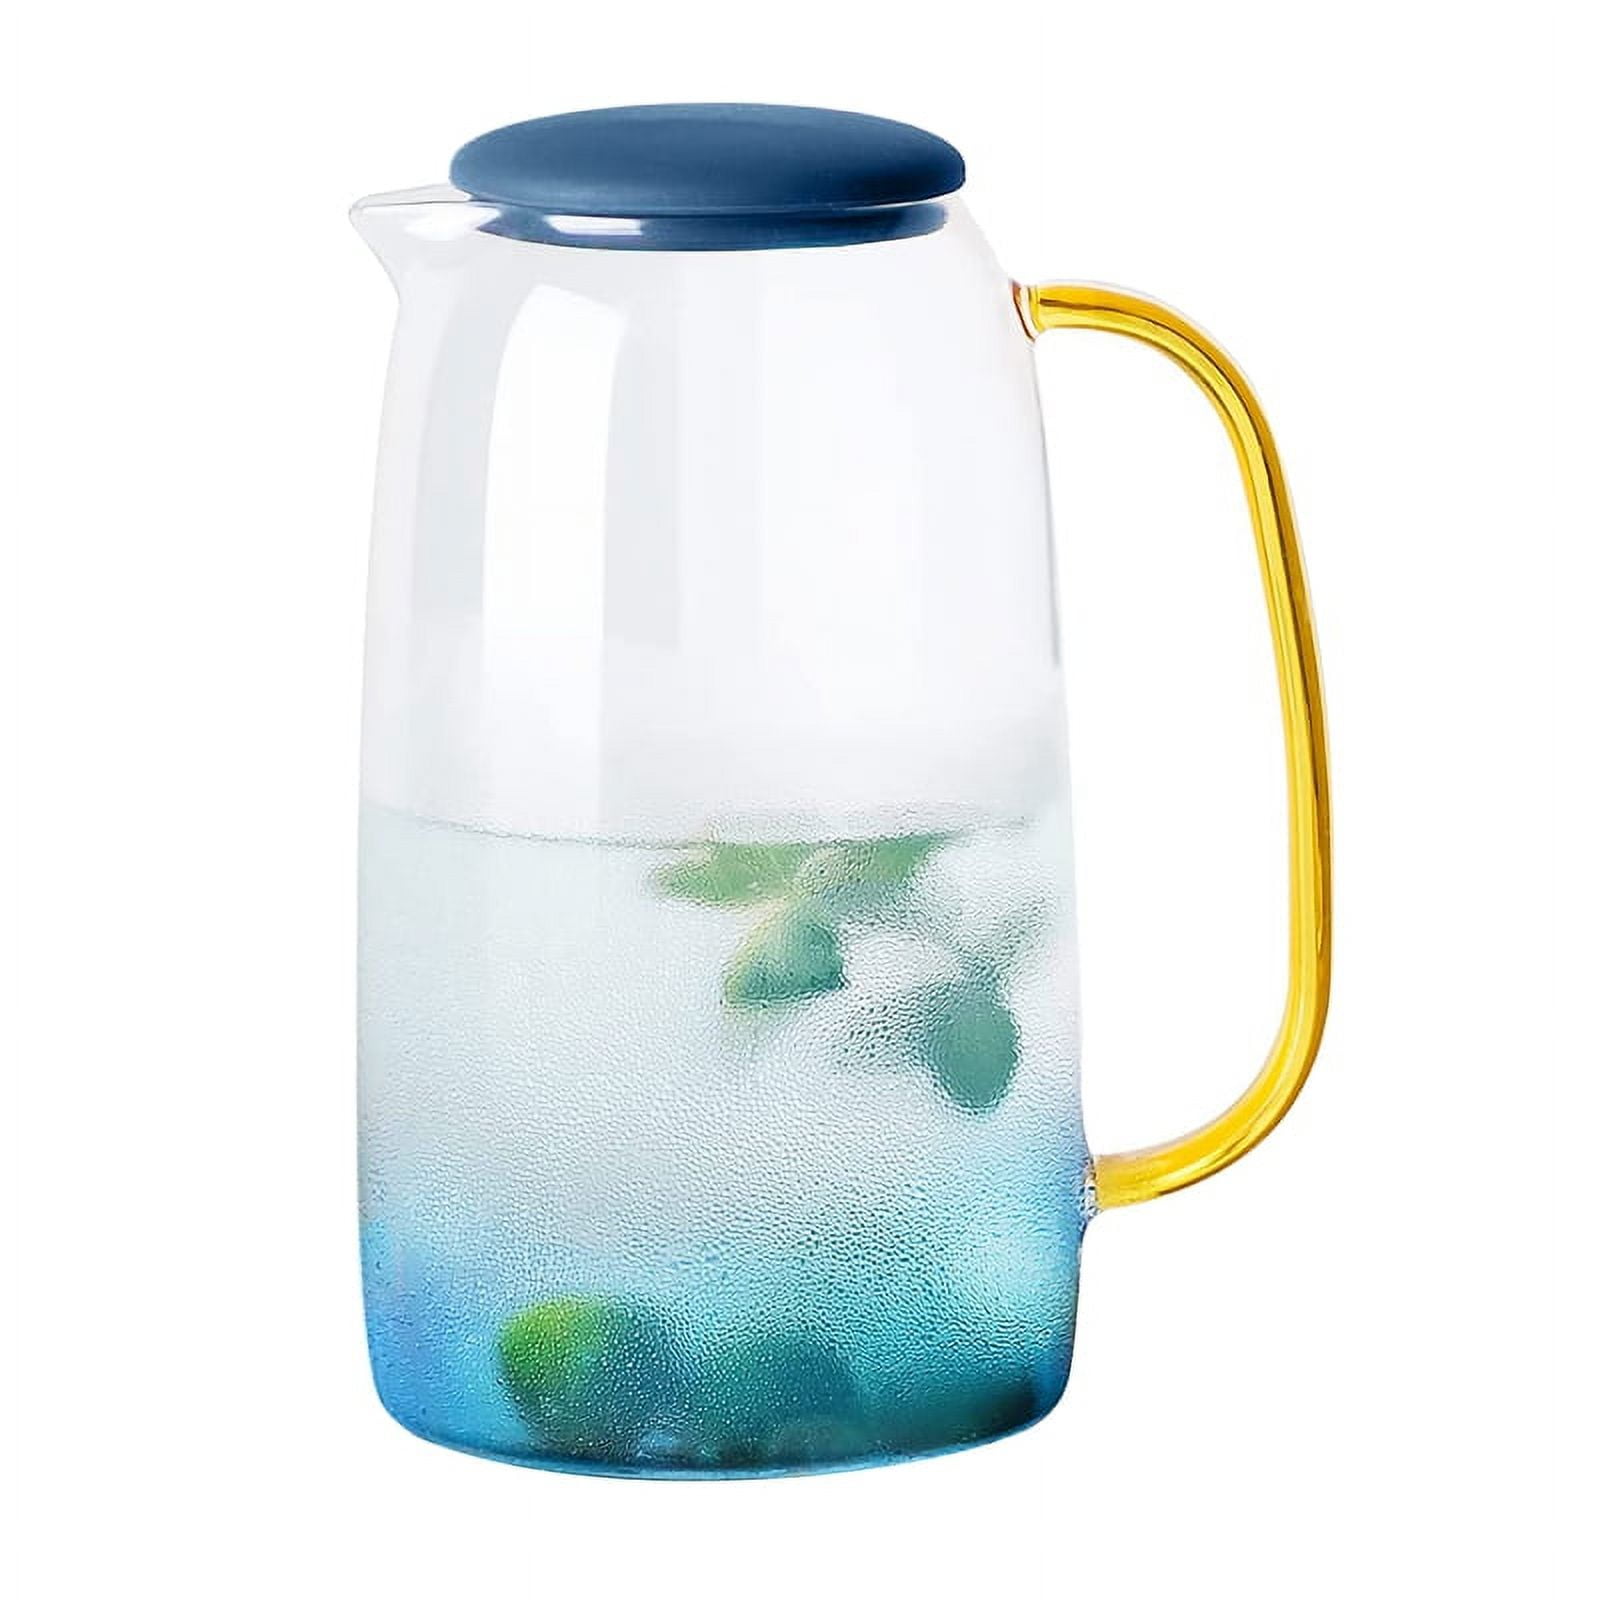 🍀68 Ounces Glass Pitcher with Lid, Heat-resistant Water Jug for Hot/Cold  Water, Ice Tea and Juic … - Pitchers & Carafes, Facebook Marketplace